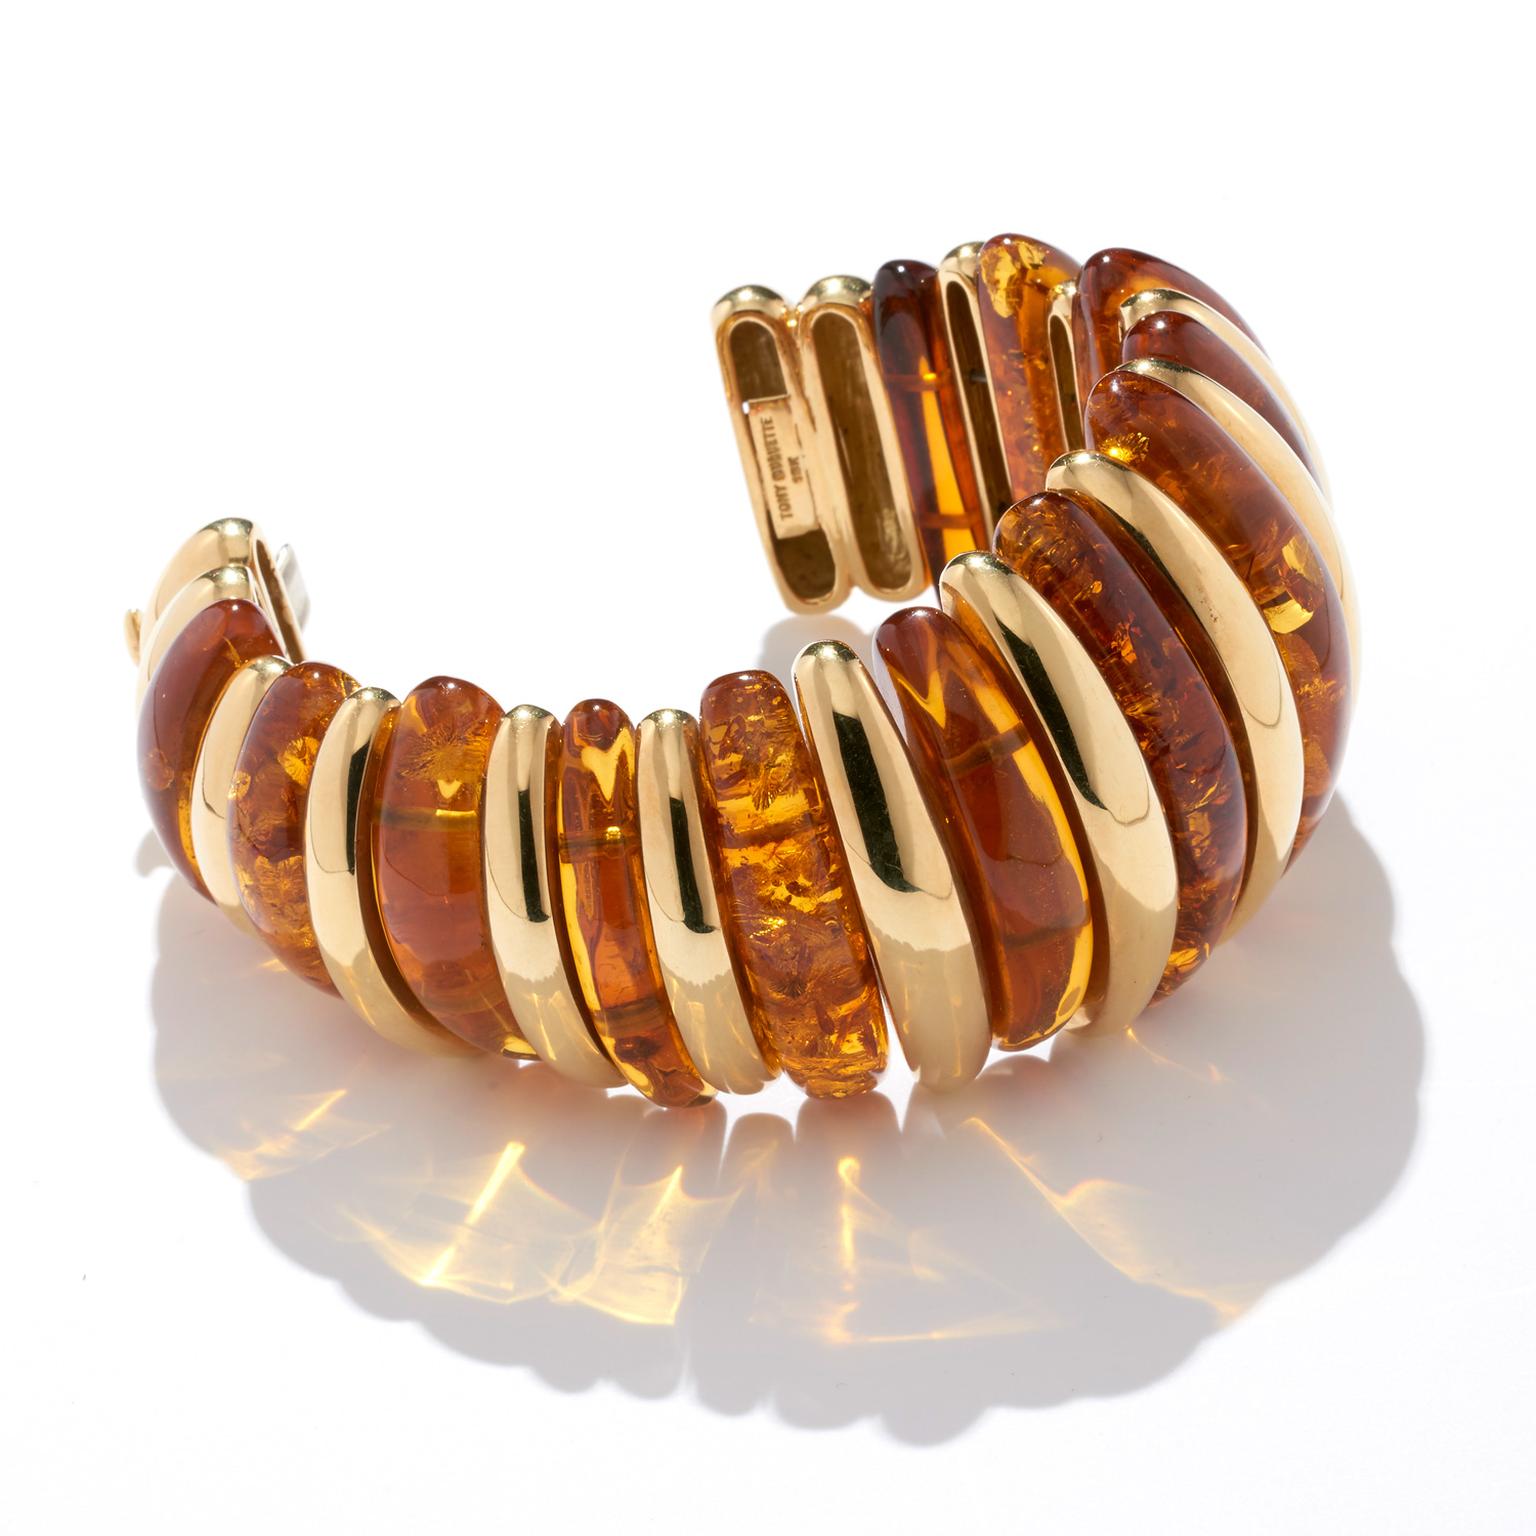 Bracelet of gold and amber by Tony Duquette